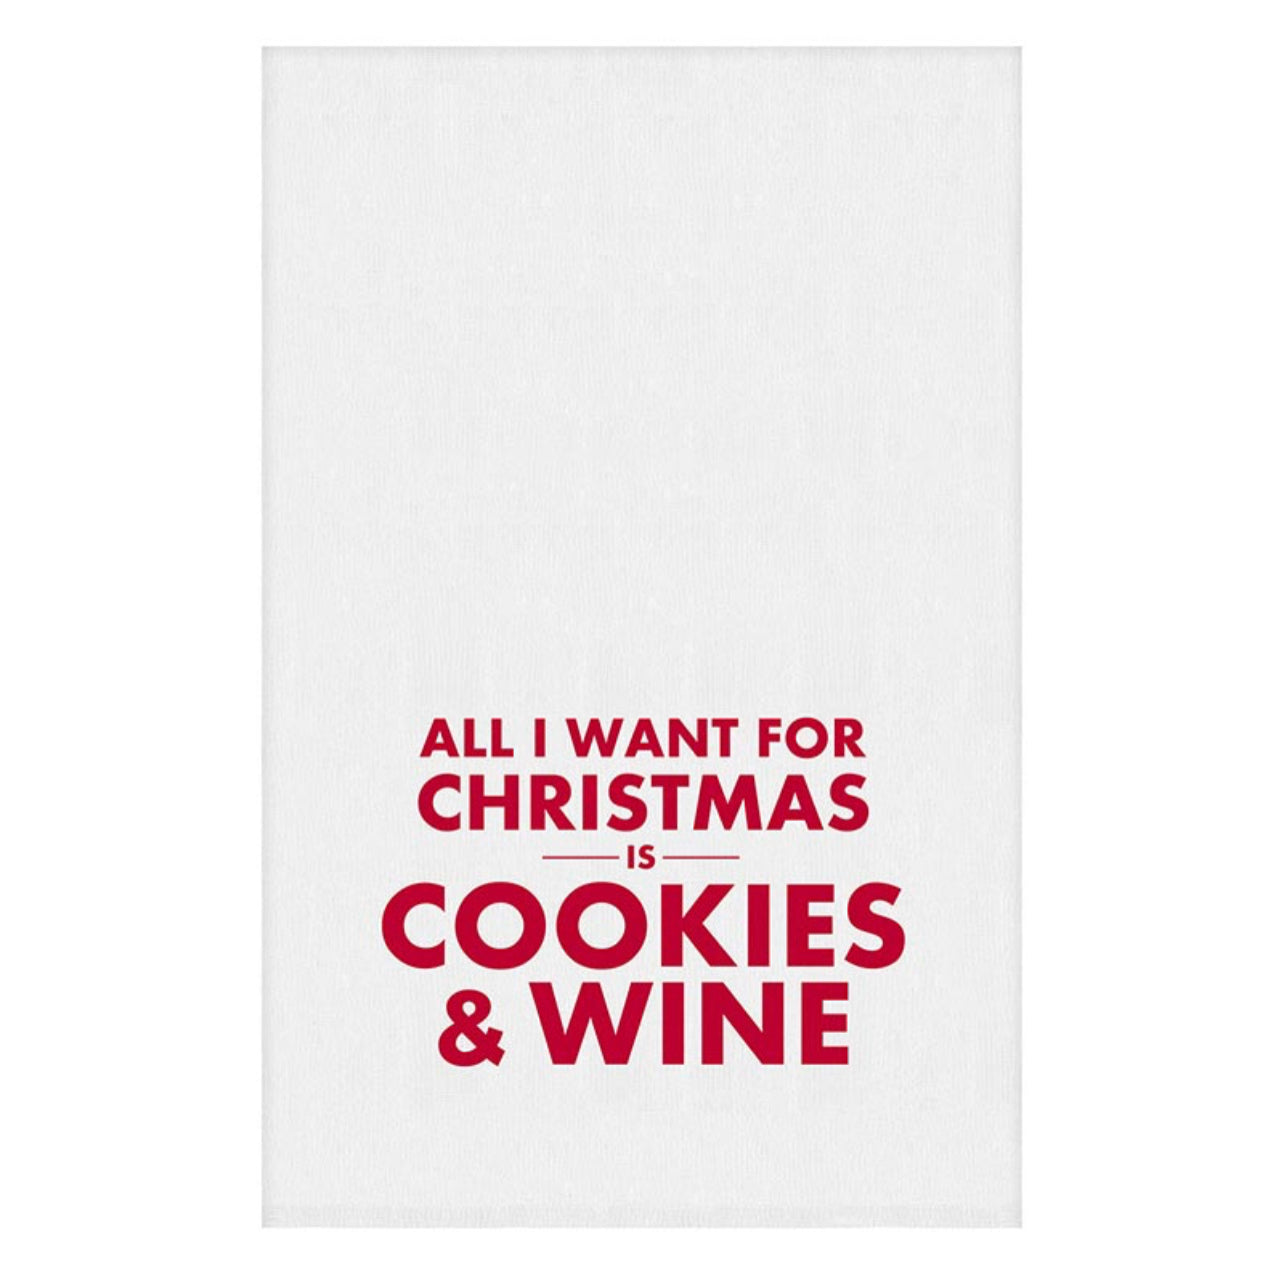 White christmas kitchen towel with red script that reads "all I want for Christmas is Cookies & wine"